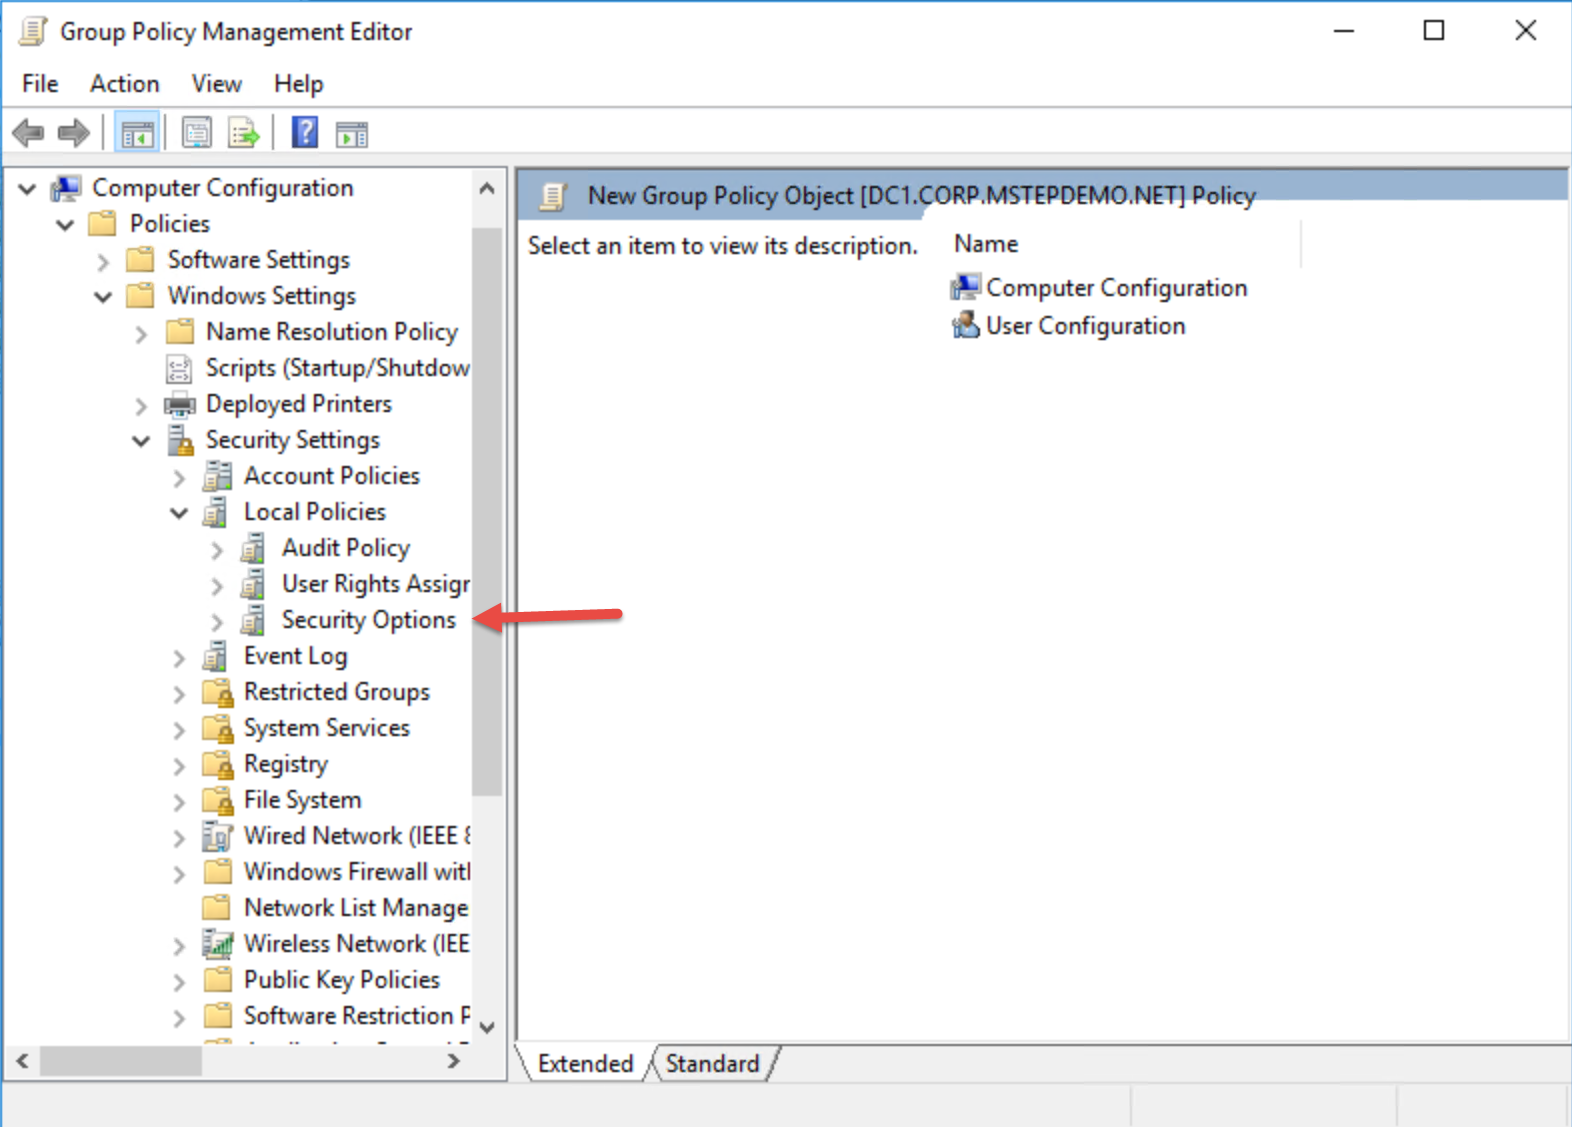 The Group Policy Management Editor displaying the location of the Security Options node.